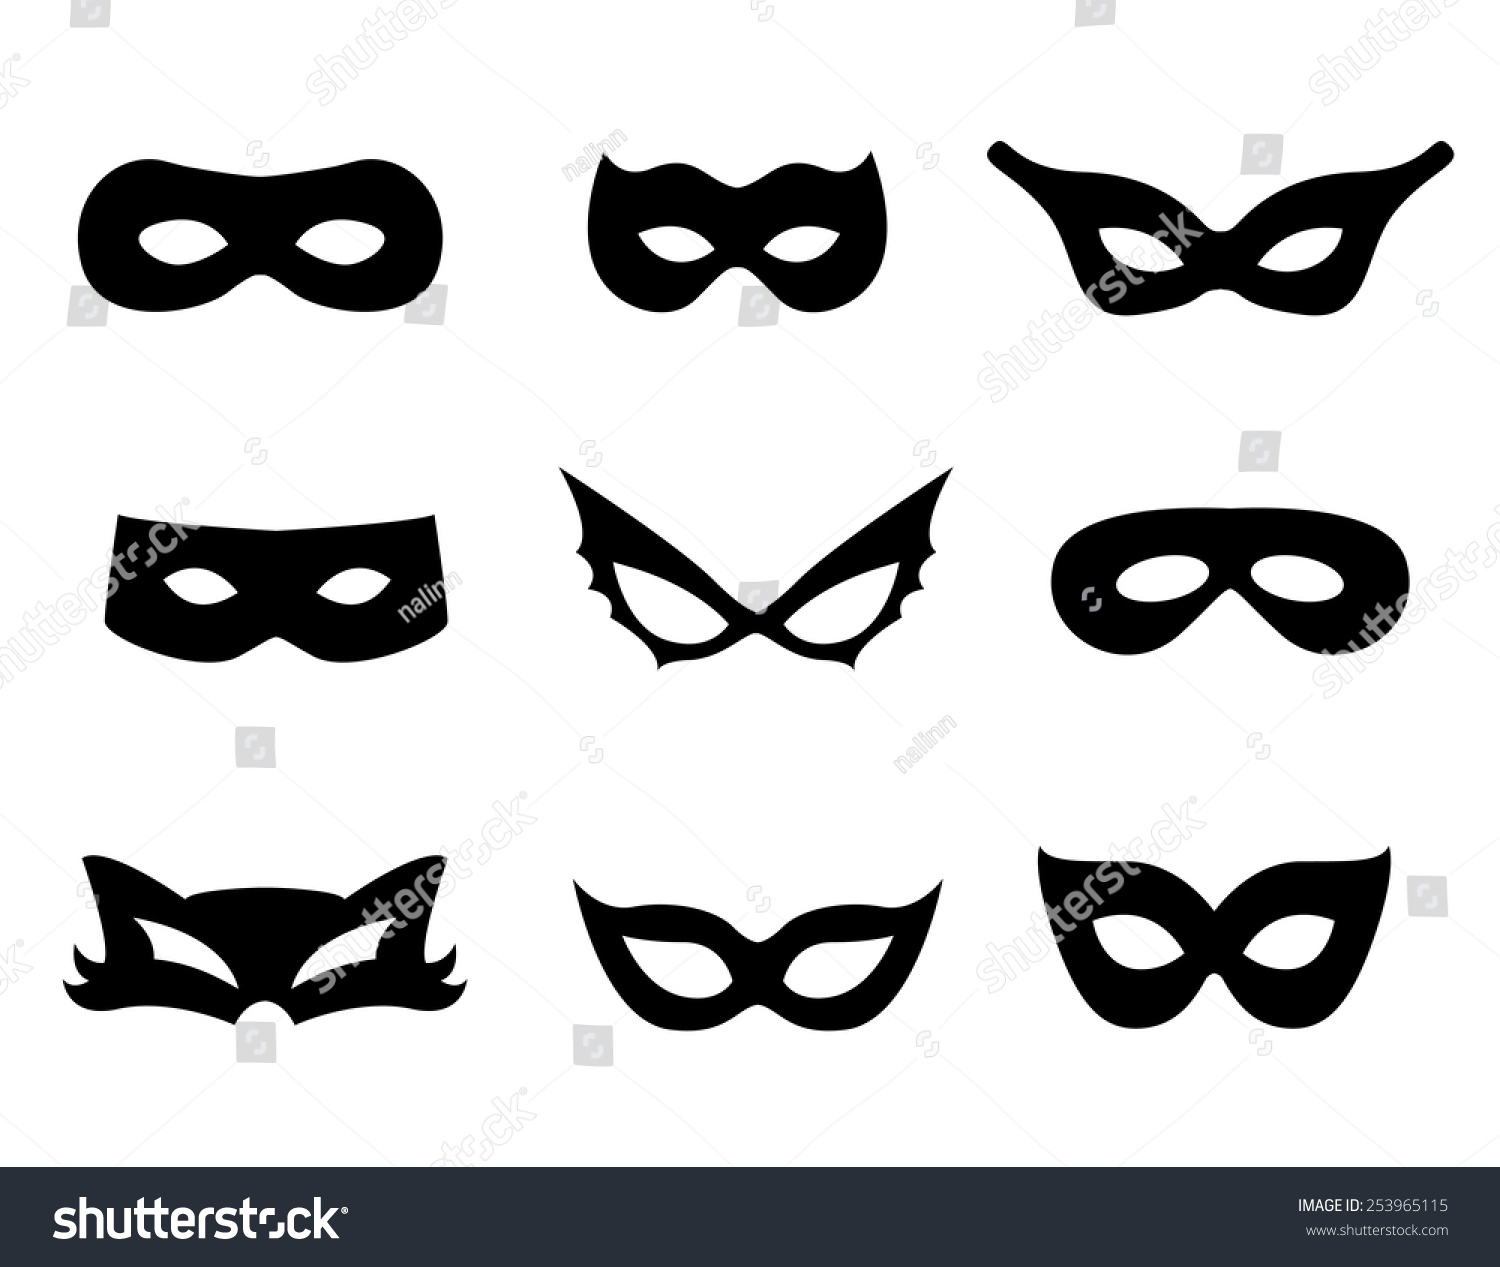 Black Mask Shapes Collection Isolated On Stock Vector 253965115